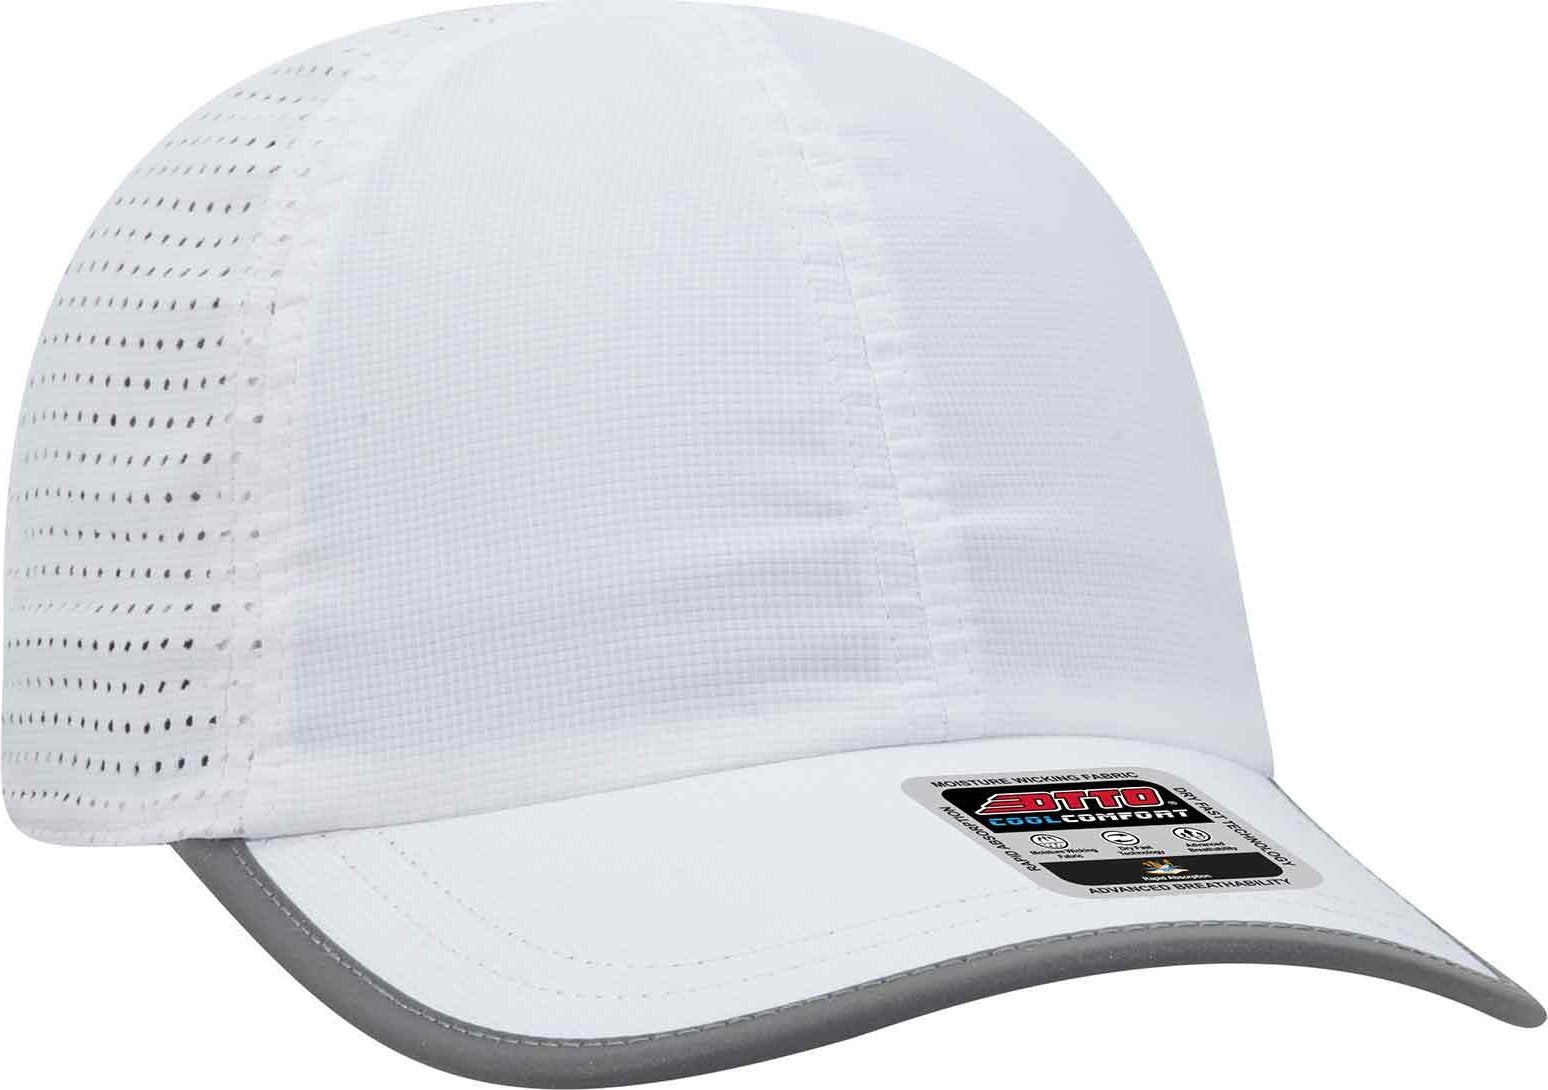 OTTO 133-1258 6 Panel Textured Polyester Pongee with Mesh Inserts Reflective Sandwich Visor Running Cap - White - HIT a Double - 1